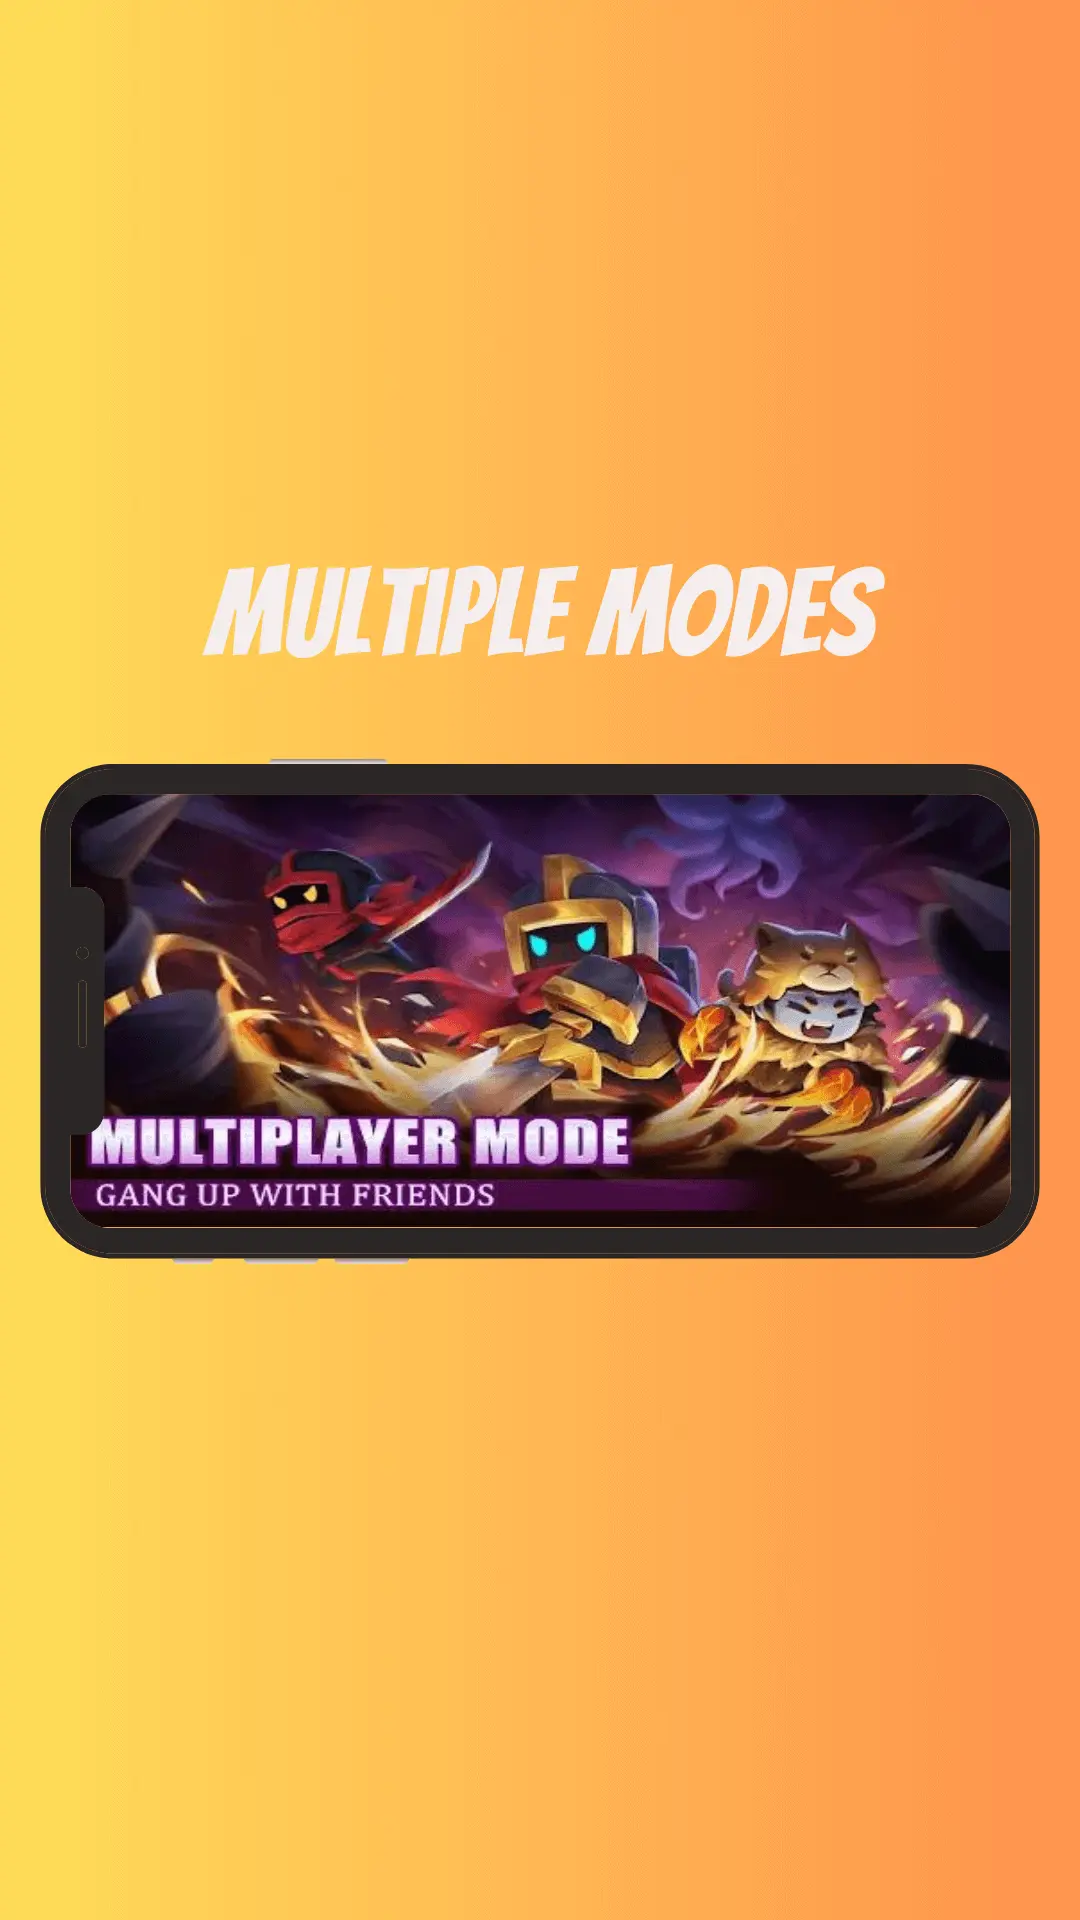 MULTIPLE MODES